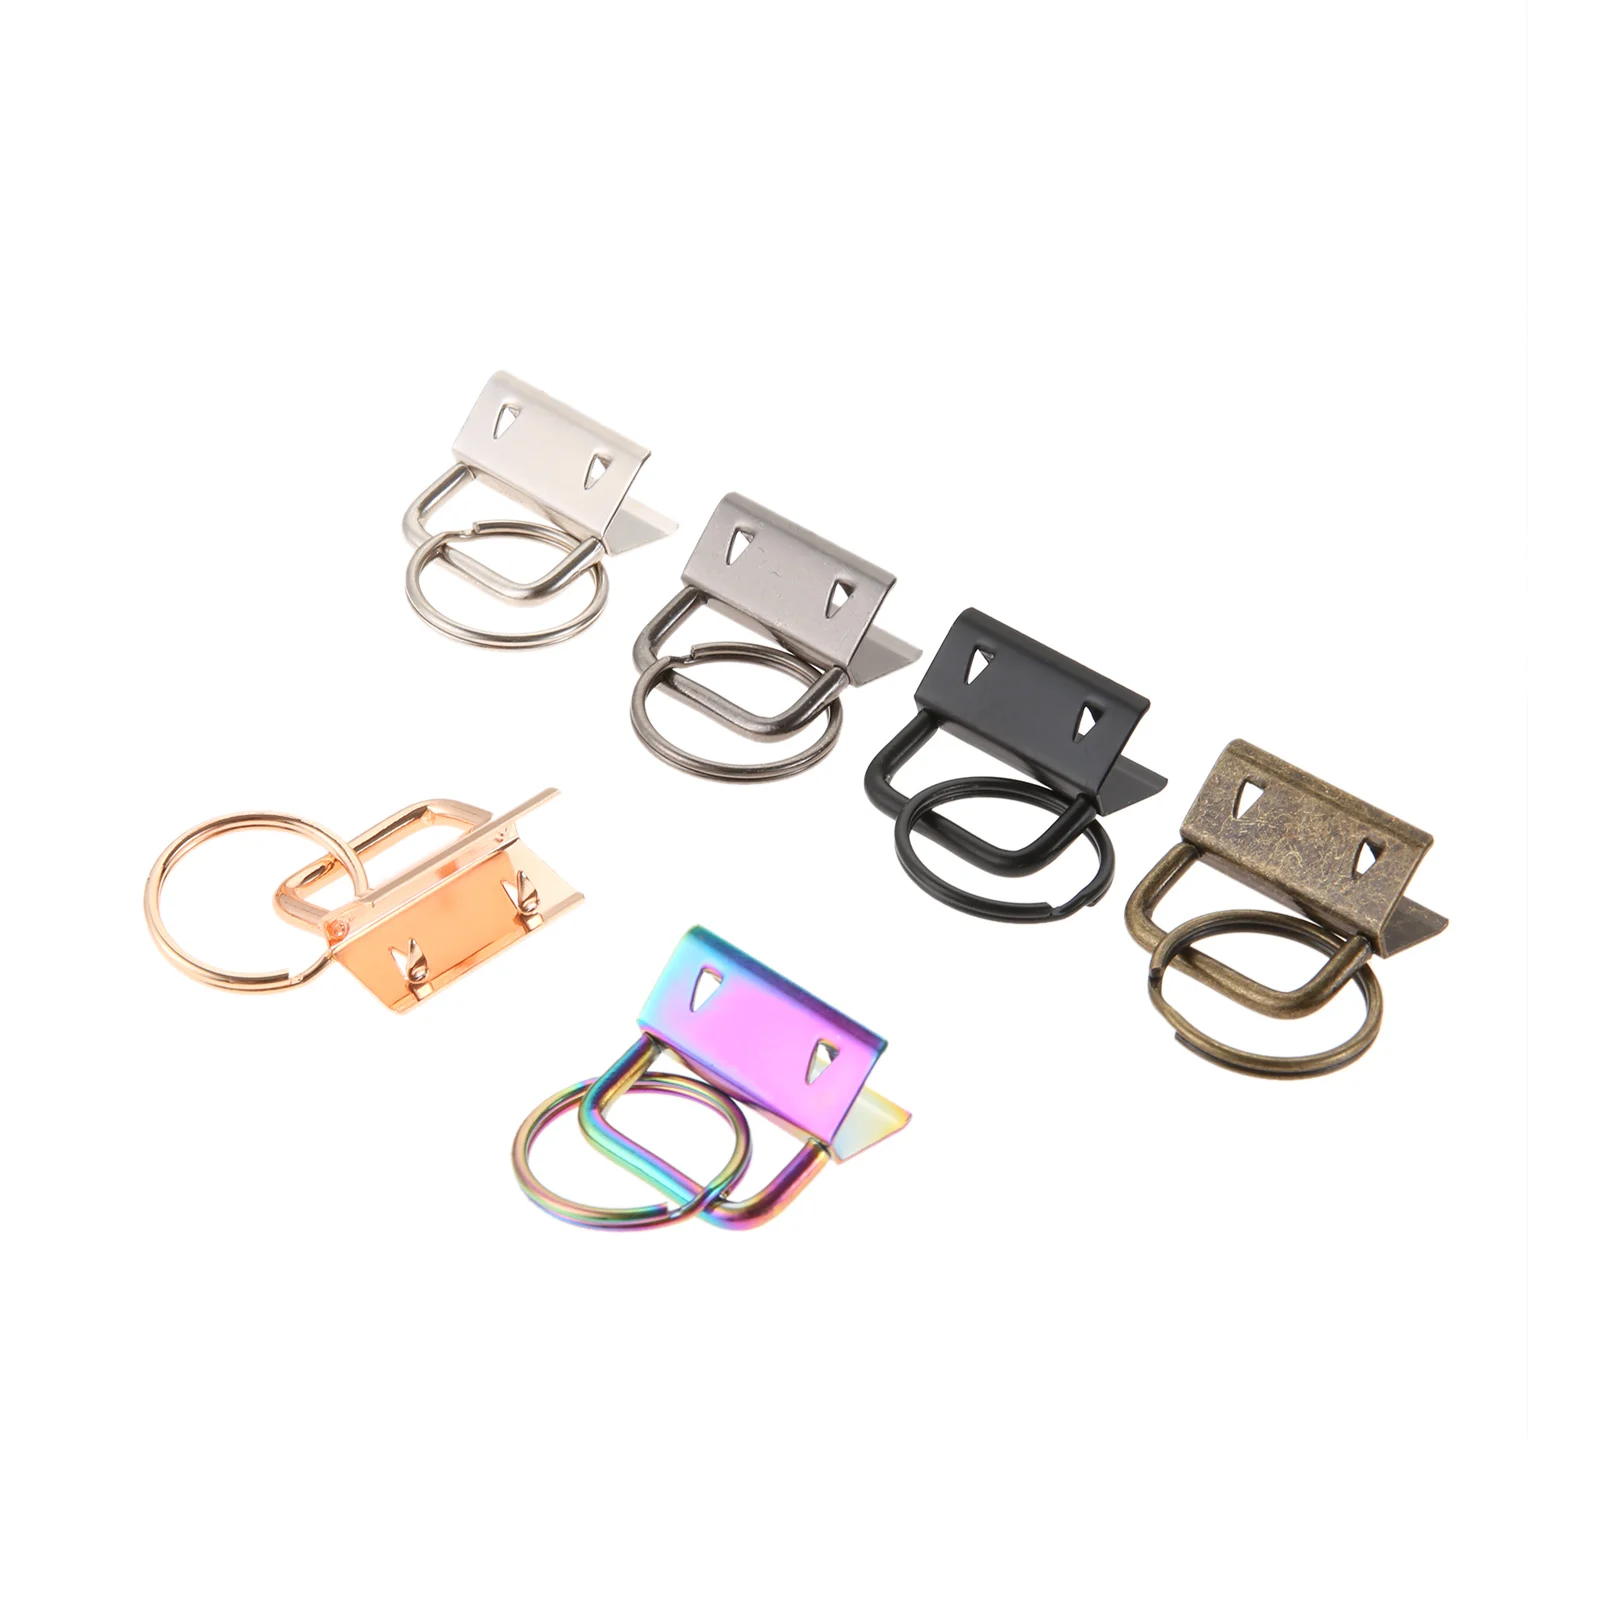 

10pcs Iron Key Fob Hardware Wristlet for Key Fobs Key Chains Webbing Ribbon Cotton Belts Suitcases Bags Accessories